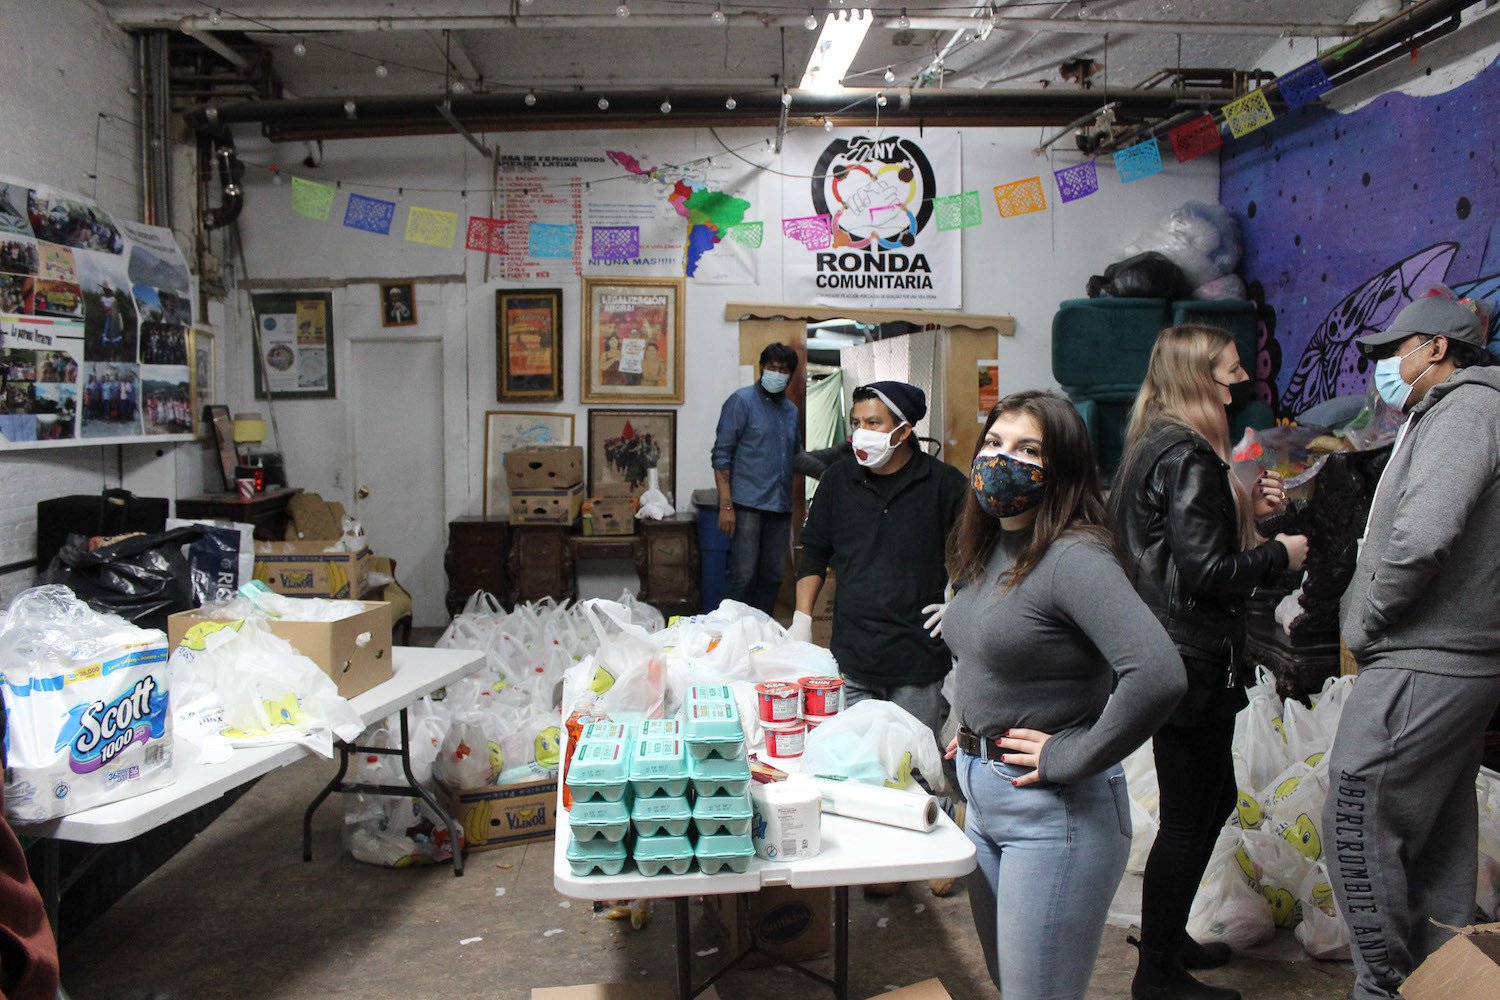 Volunteers working at the food distribution rally at the Red de Pueblos Transnacionales headquarters in the South Bronx on March 20. Volunteers were both from Red de Pueblos Transnacionales and the American Indian Community House. March 2021